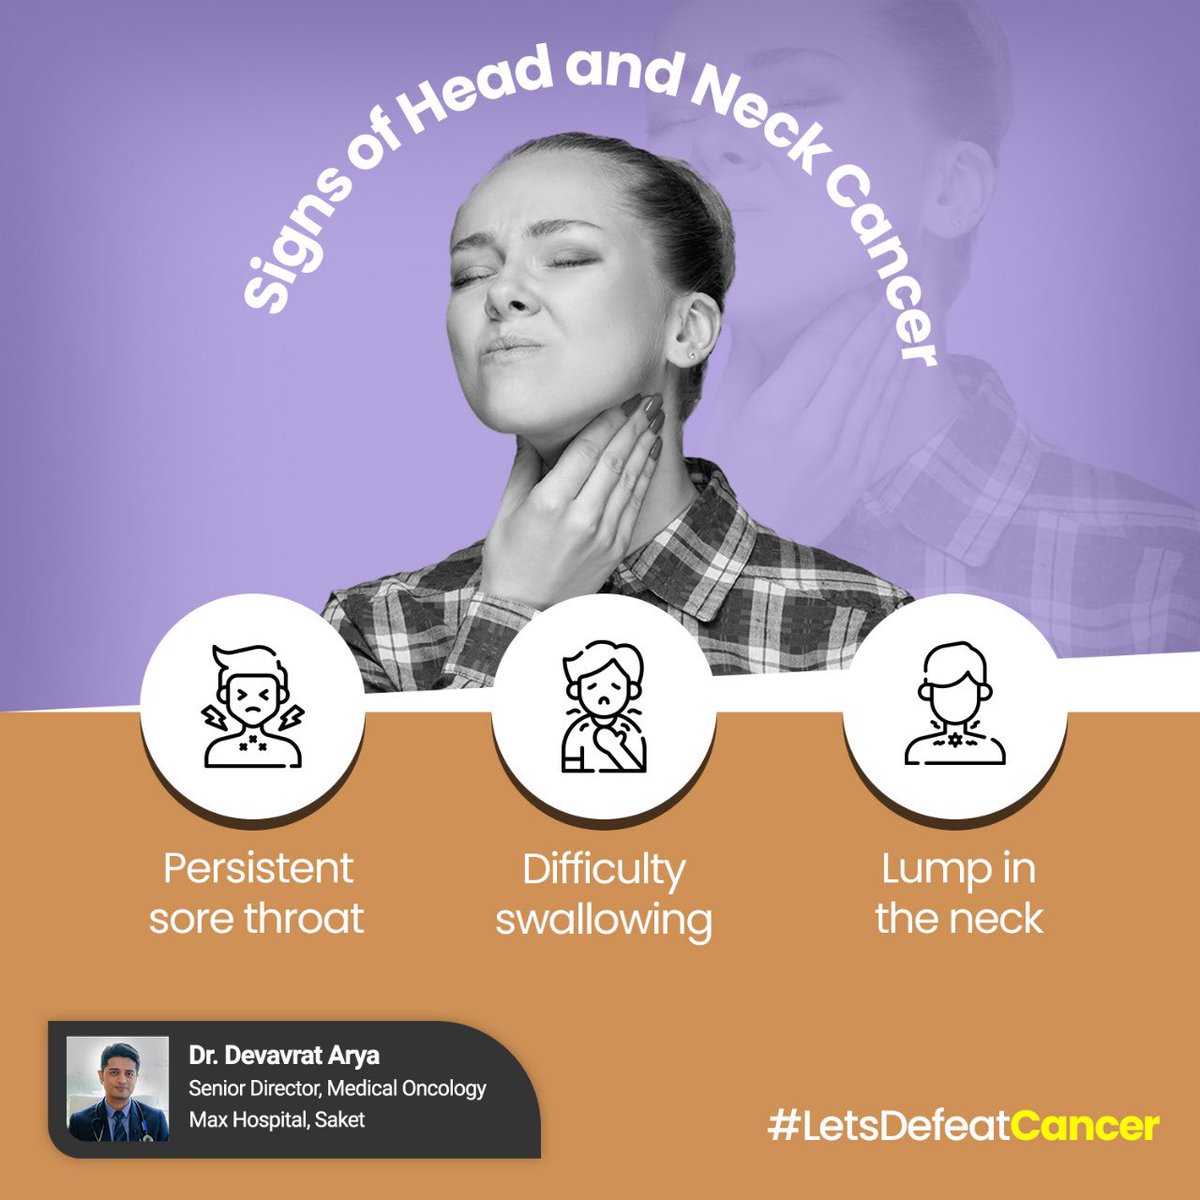 Knowing the signs and symptoms of head and neck cancer can lead to early diagnosis and better outcomes. If you experience any of these symptoms, consult a doctor.

#KnowTheSigns #EarlyDiagnosis #cancersign #neckcancer #LetsDefeatCancer #DrDevavratArya #endcancer